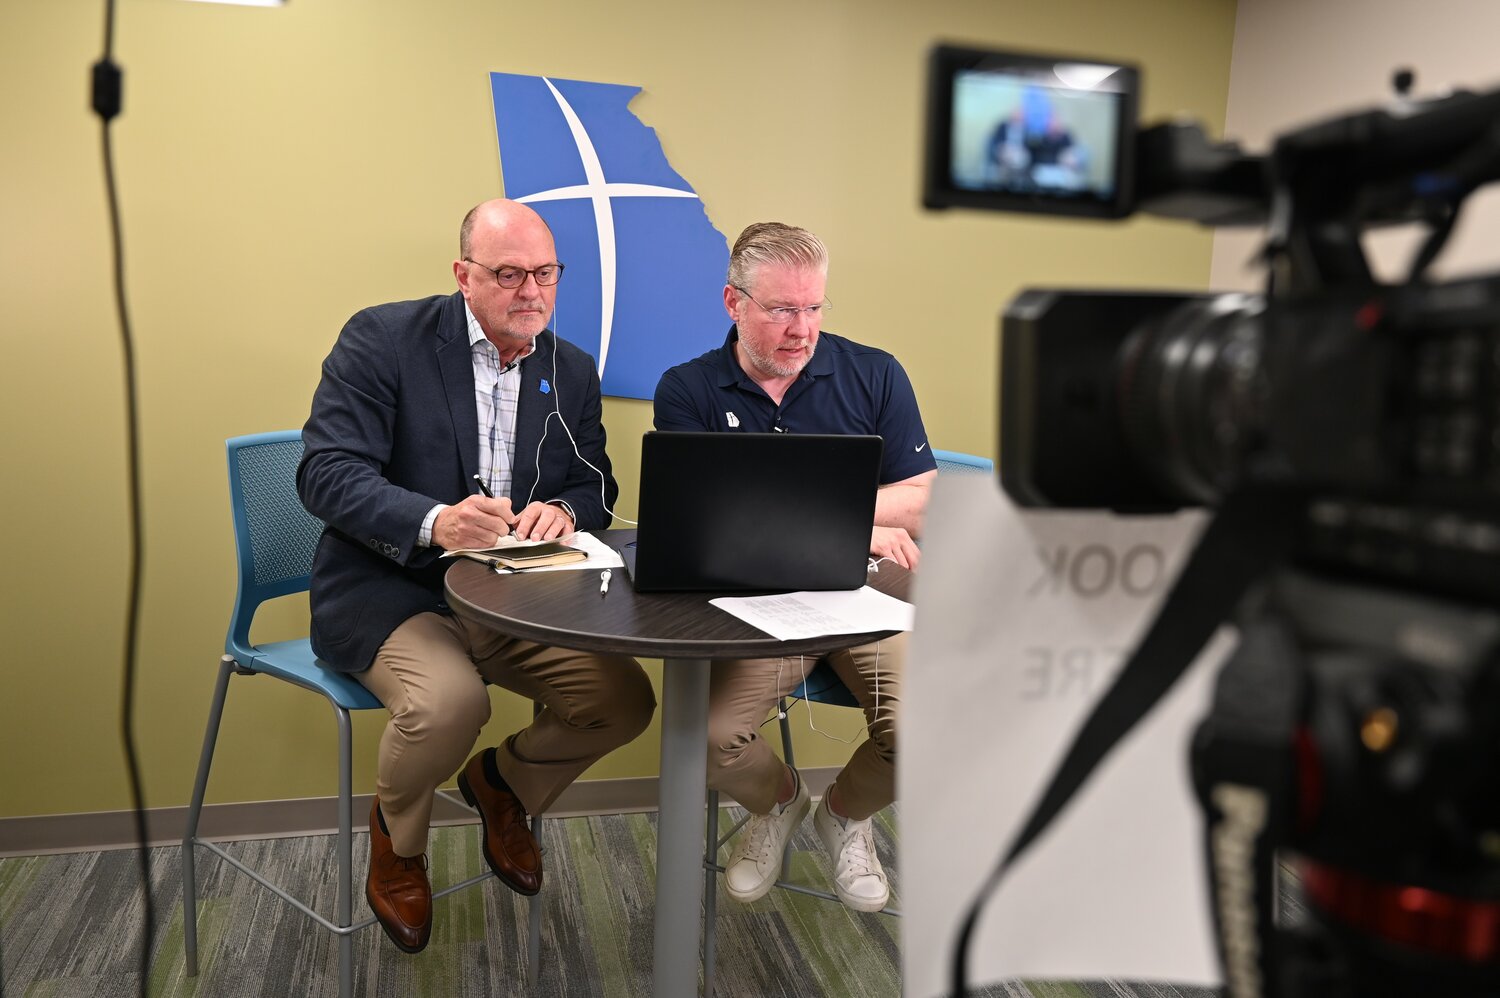 Georgia Baptist Mission Board Executive Director W. Thomas Hammond Jr., left, and communications director Scott Smith, prepare for an online prayer event on behalf of the SBC annual meeting. (Index/Roger Alford)